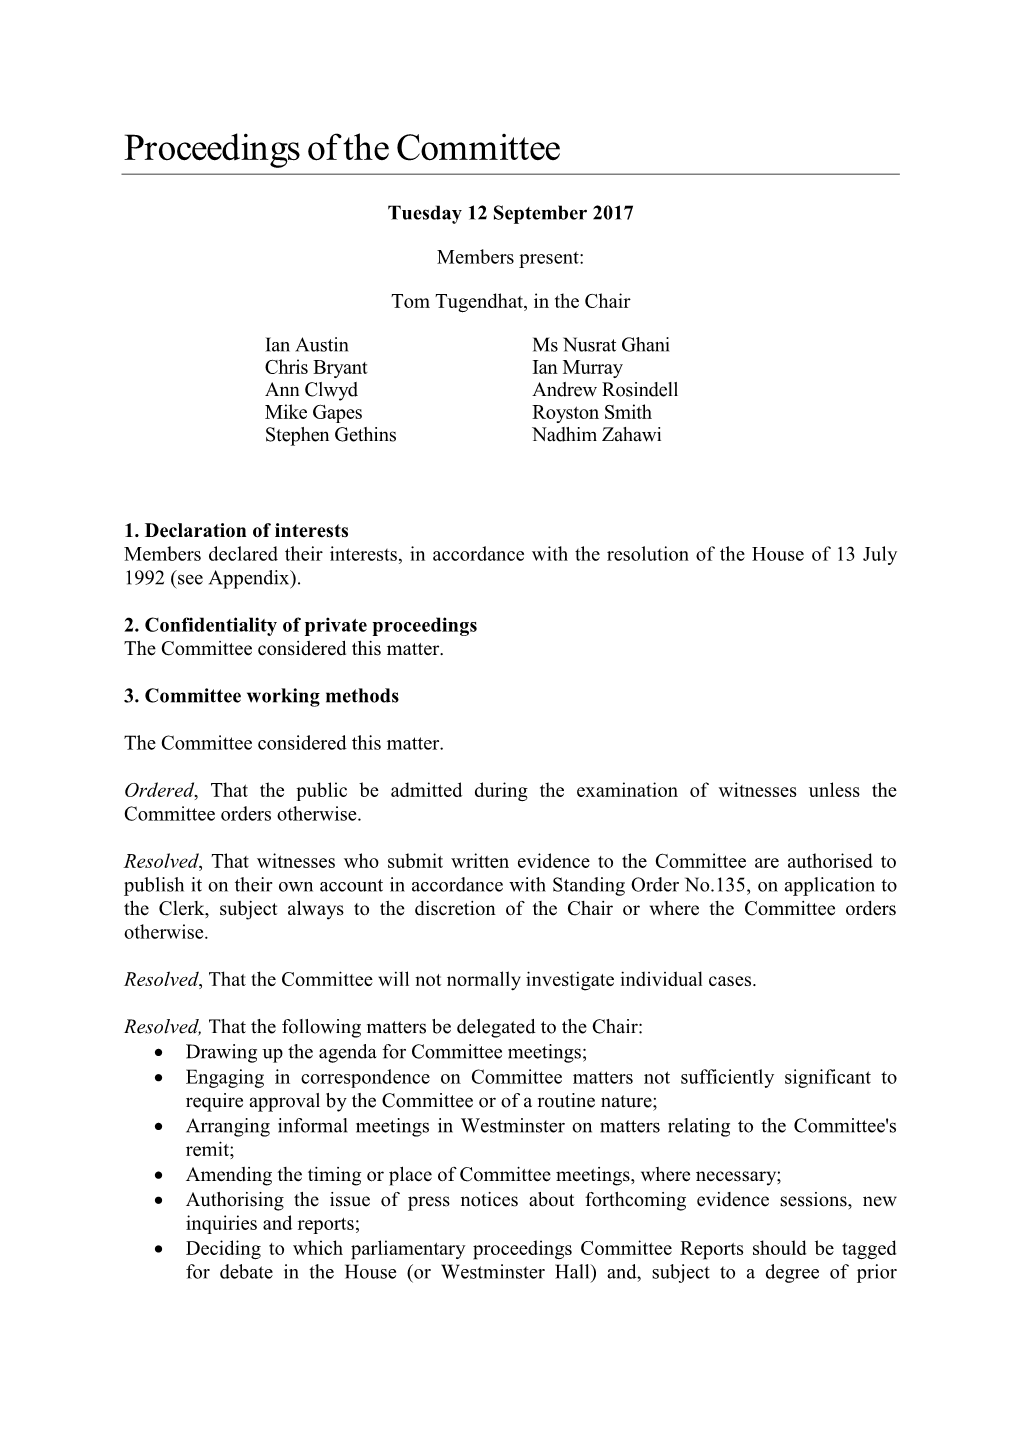 Formal Minutes Relating to the Consideration of the Report Are Published with the First Report of the Committee, HC 435